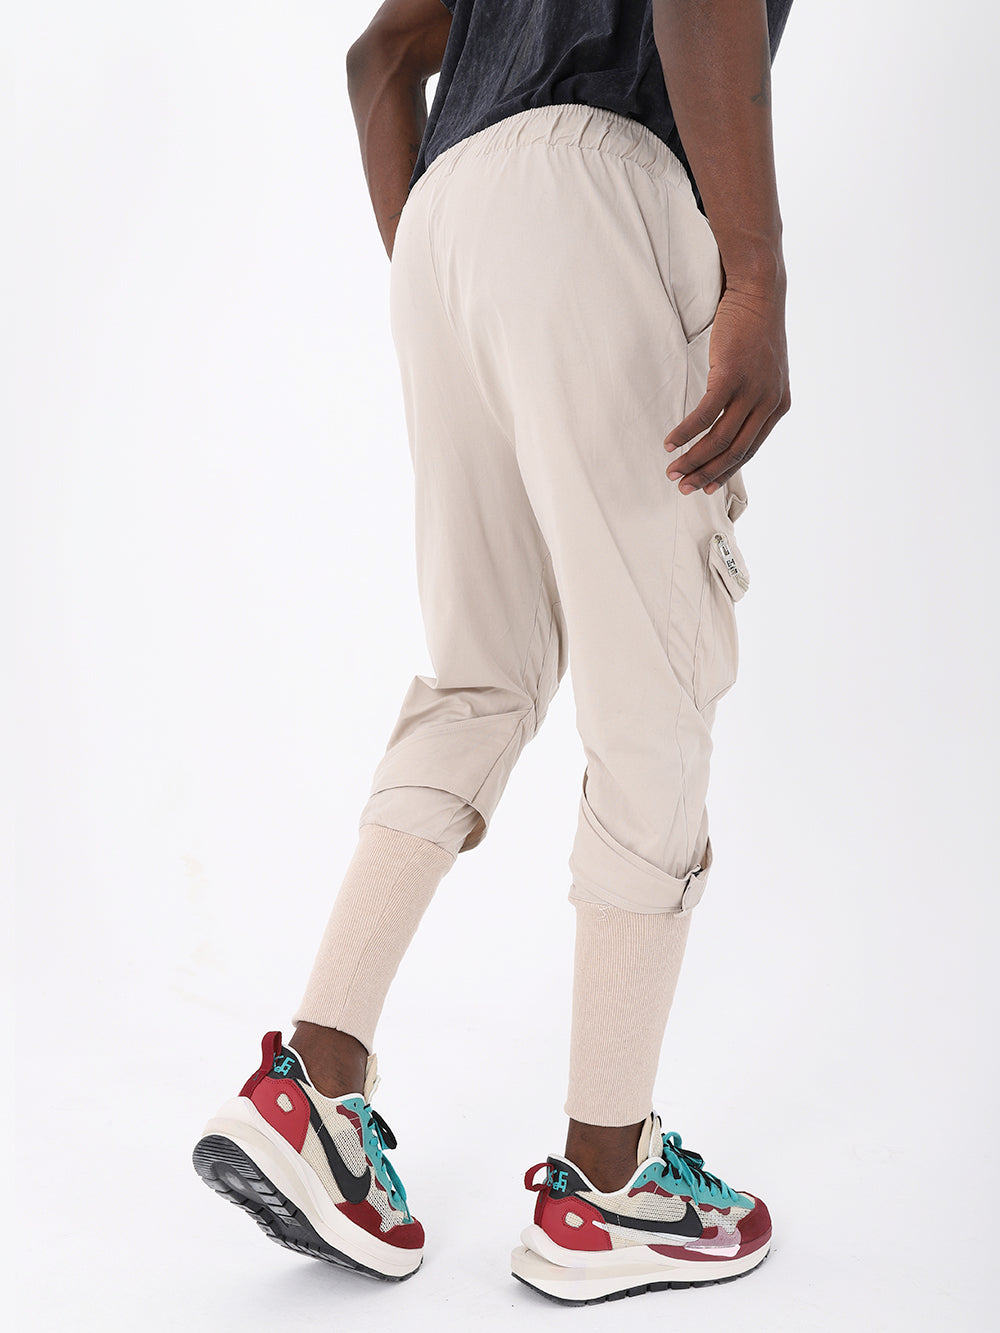 A man wearing JUPITER JOGGERS and sneakers.